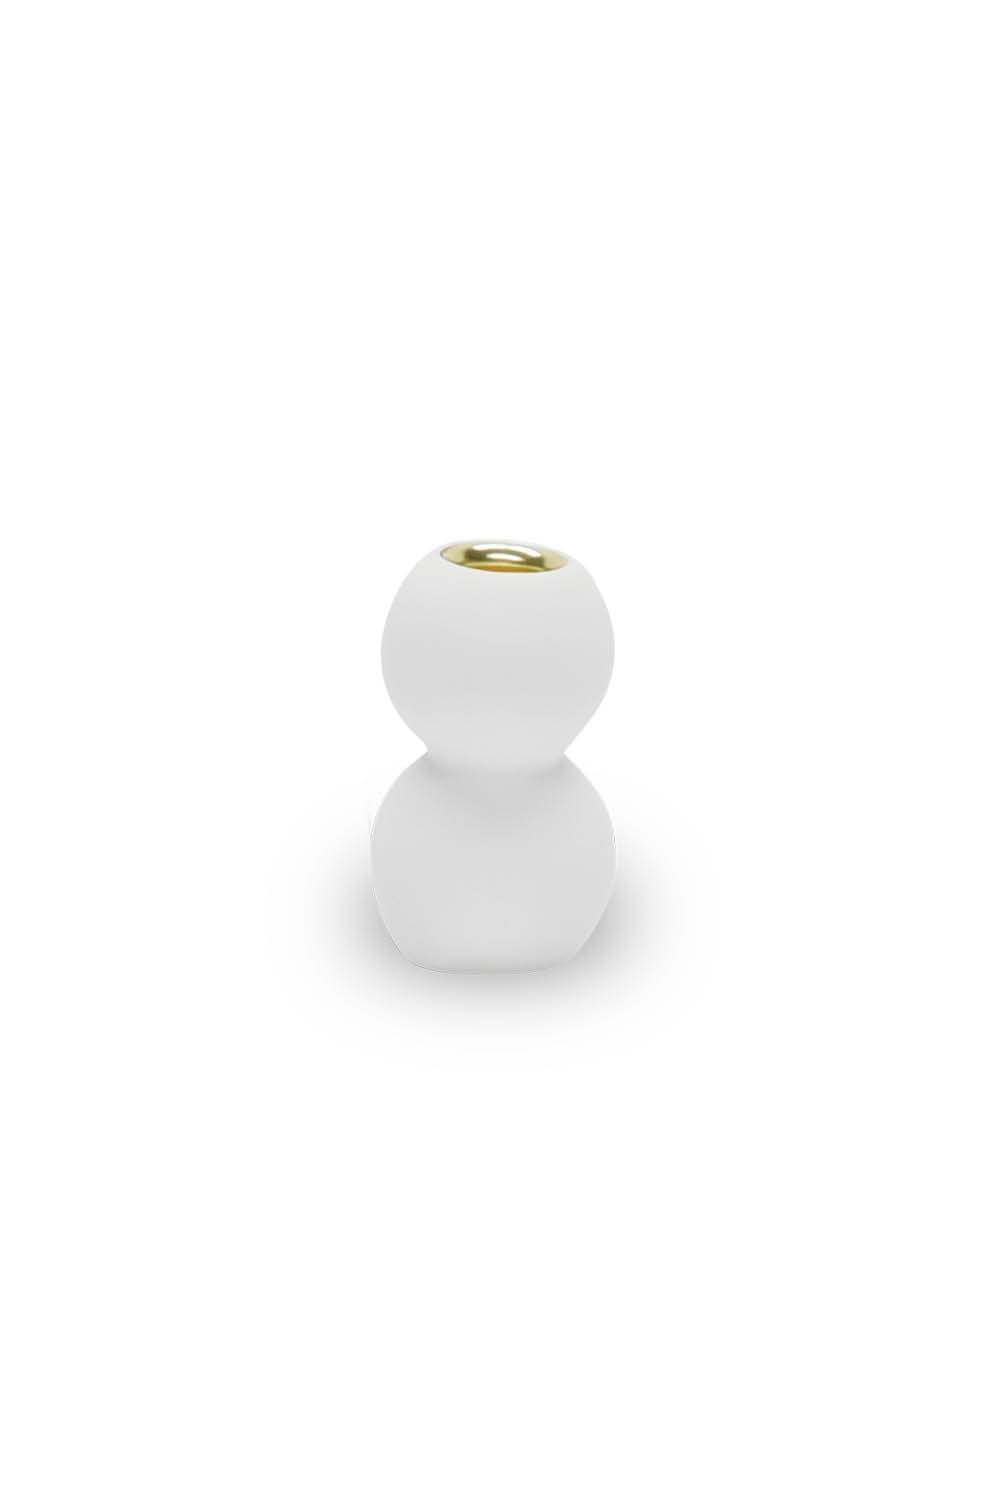 BUBBLE Two Bubble Small Candleholder in White